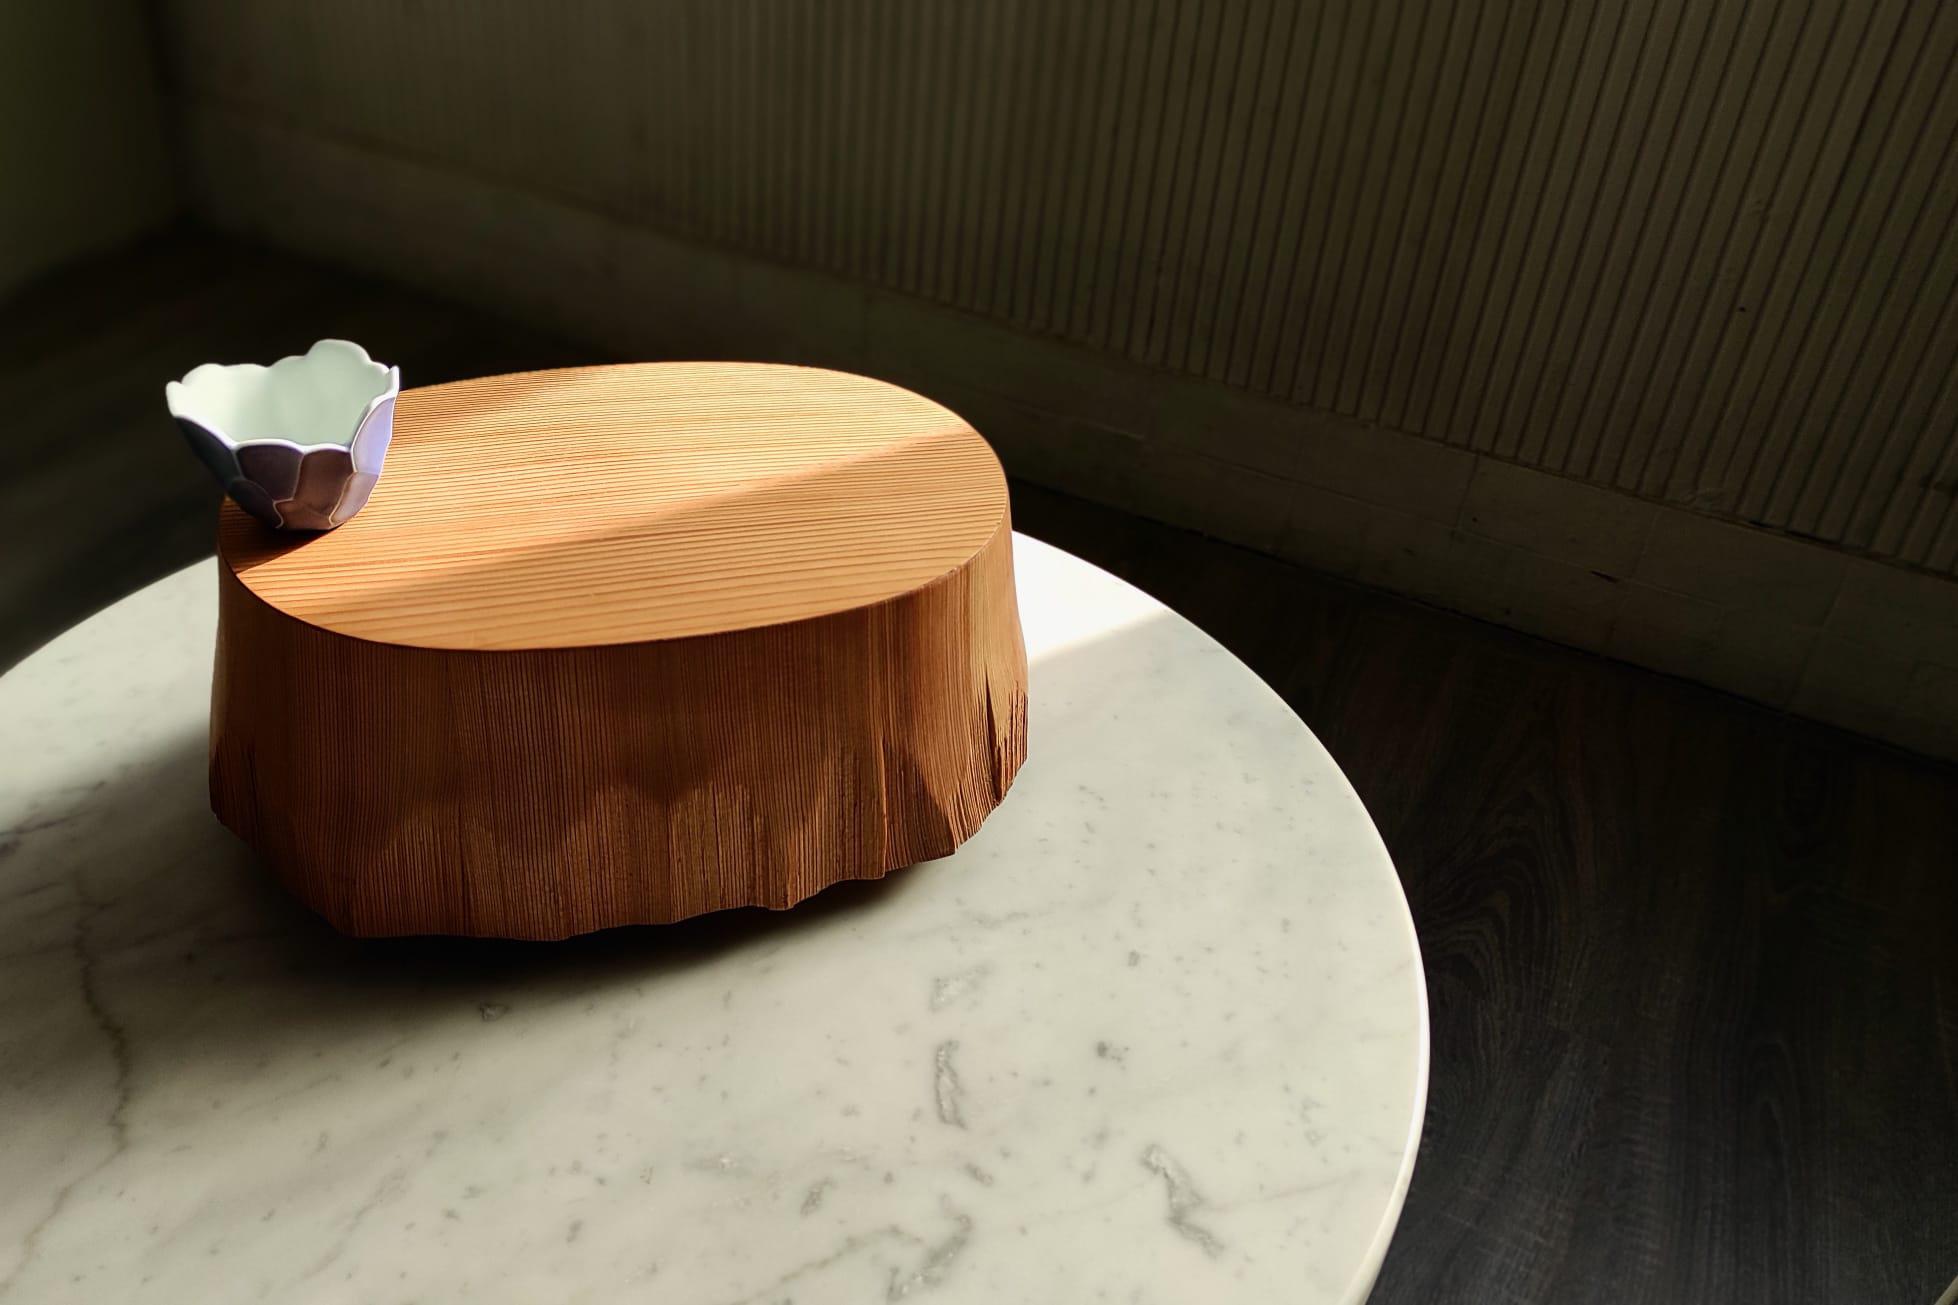 Contemporary Japanese Cedar Wood Box with Arita Porcelain Vase 'Hope' by Mario Trimarchi